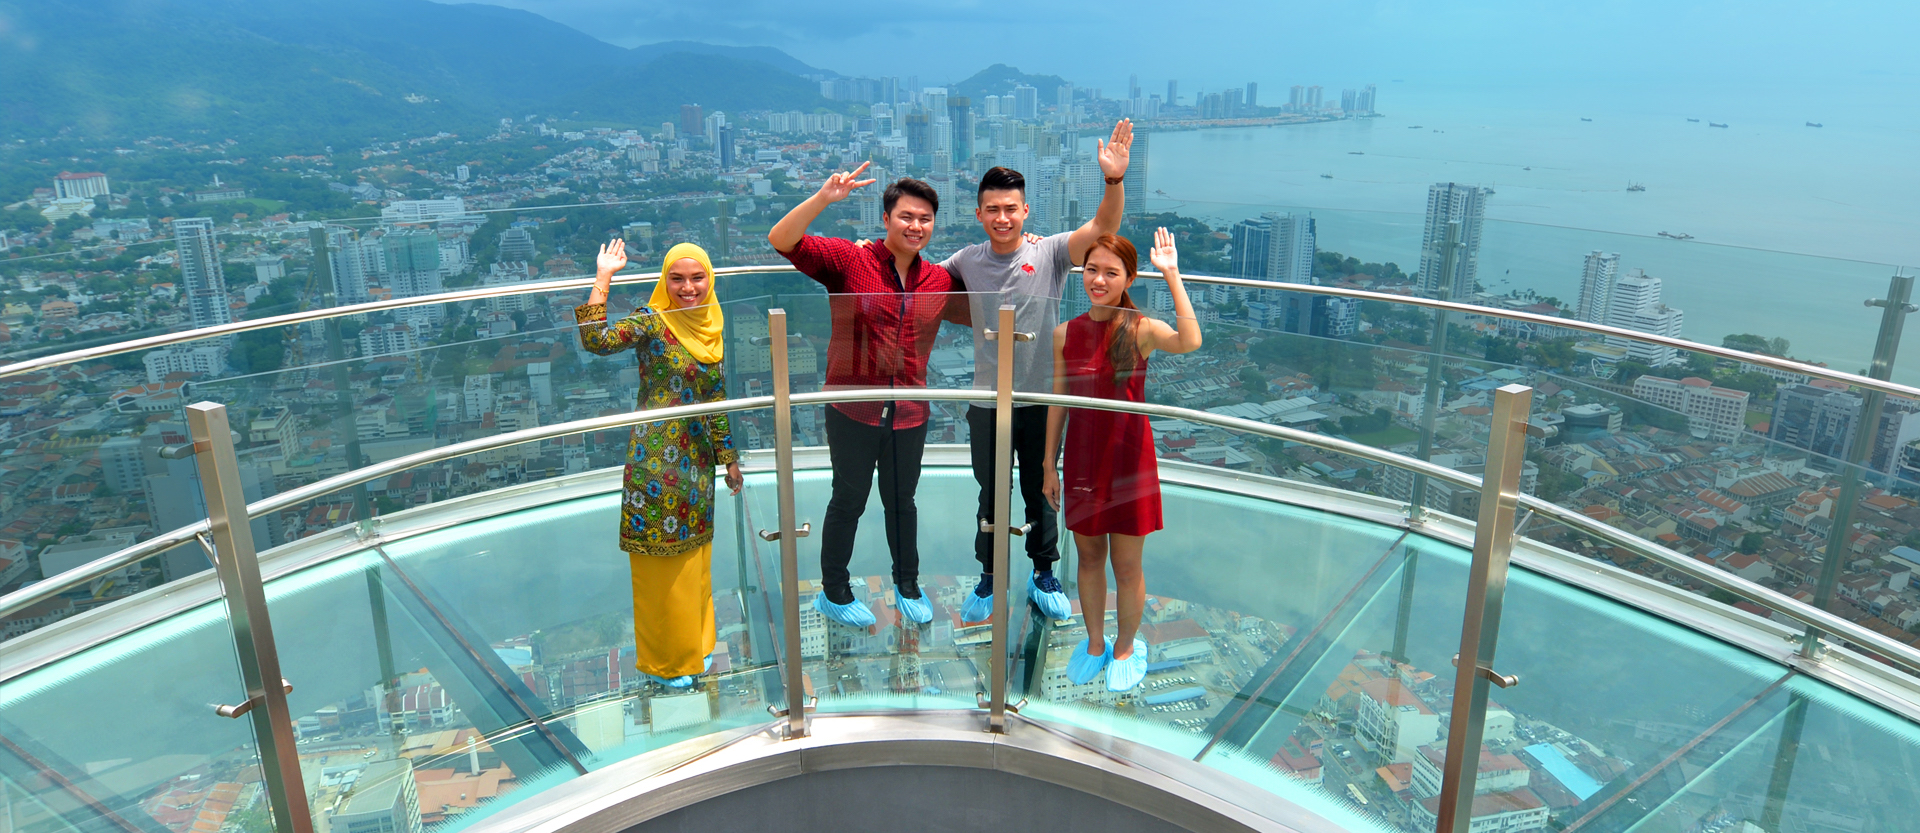 The Habitat Penang Hill & Tree top Walk             (Private tour 6 hours)